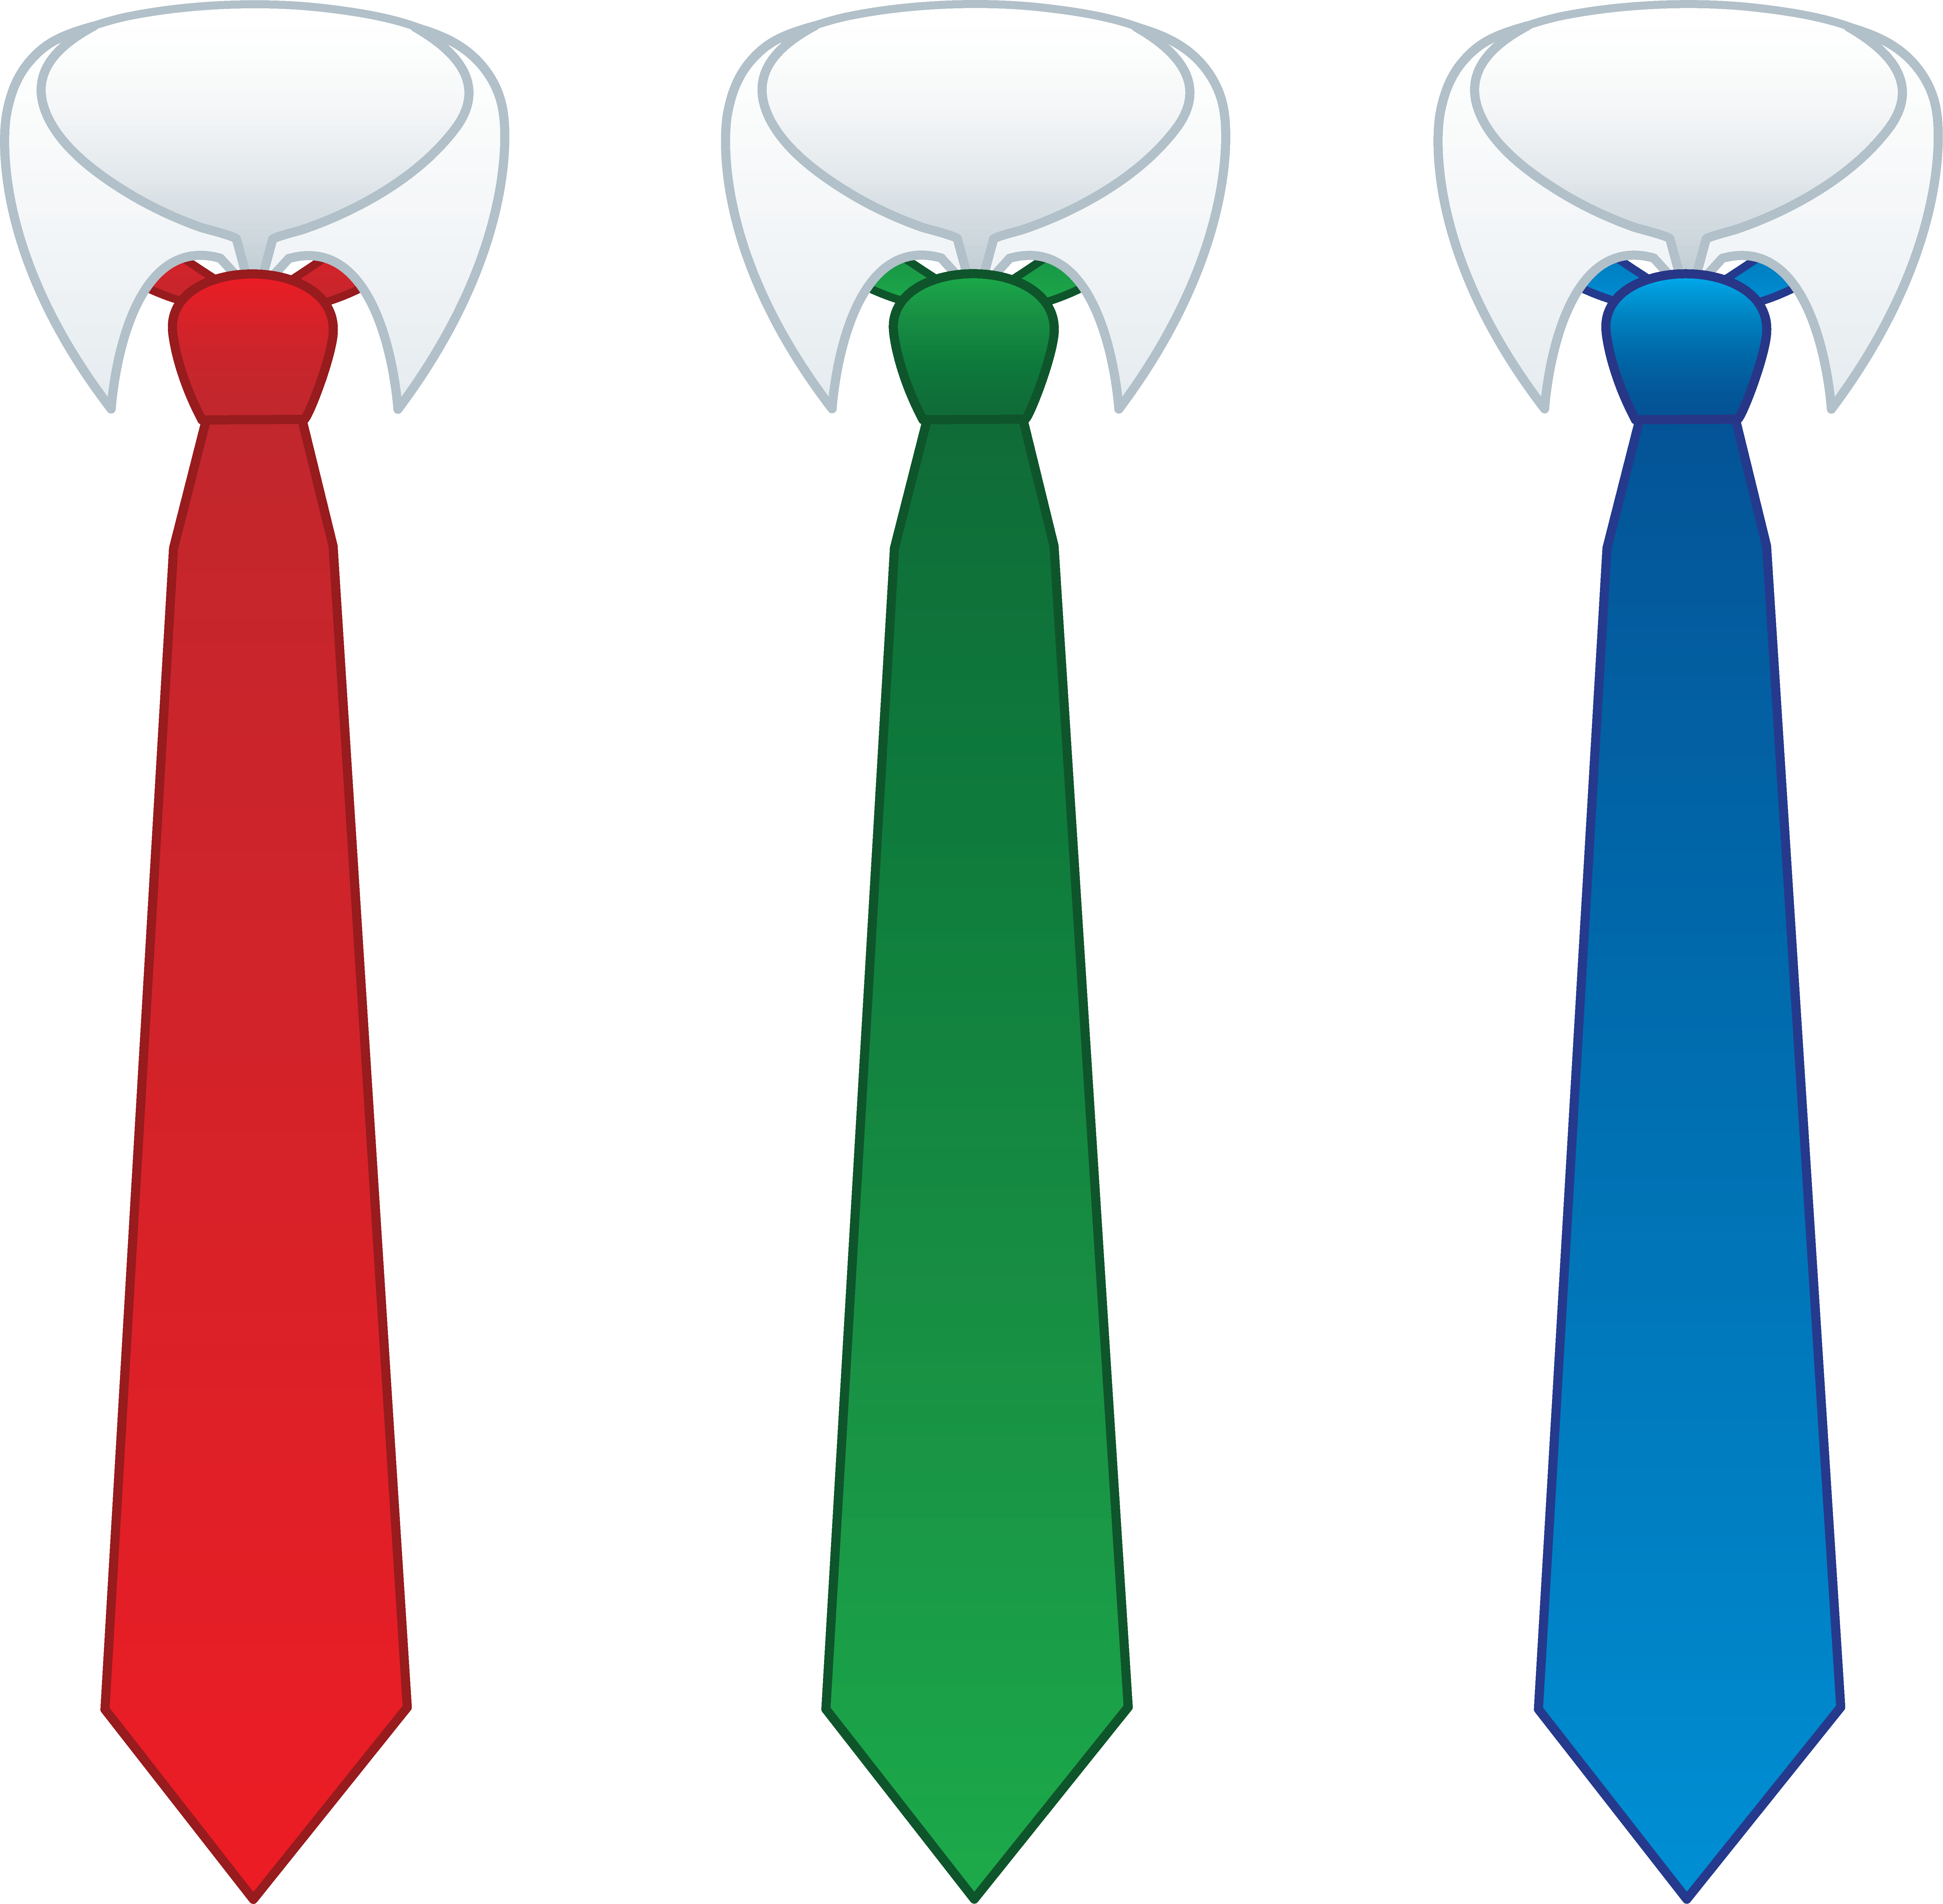 ugly tie clipart - photo #26